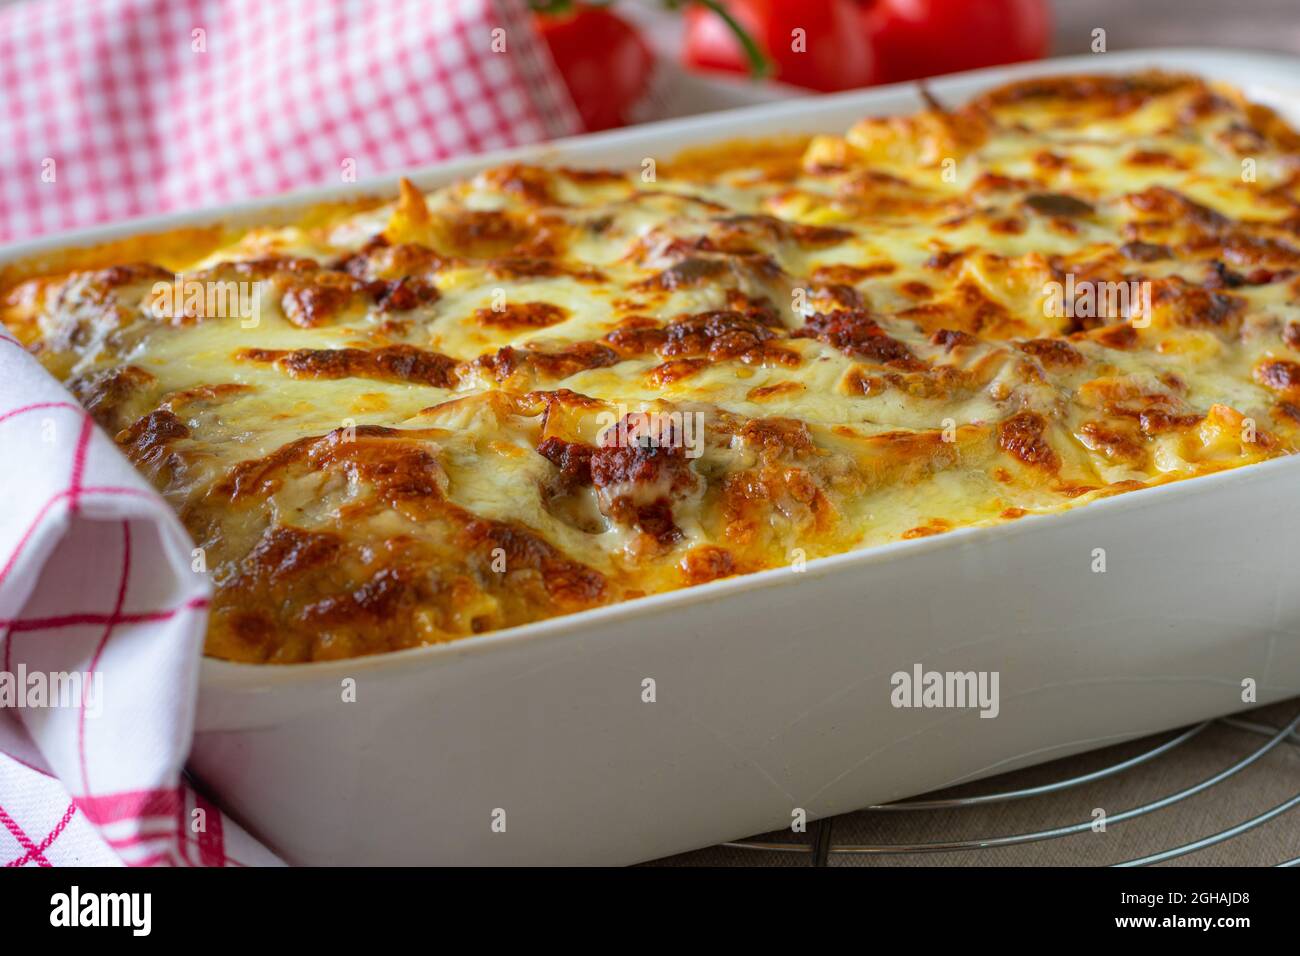 Traditional fresh baked italian pasta casserole with bolognese sauce, bechamel sauce and sliced mozzarella topping in a baking dish Stock Photo